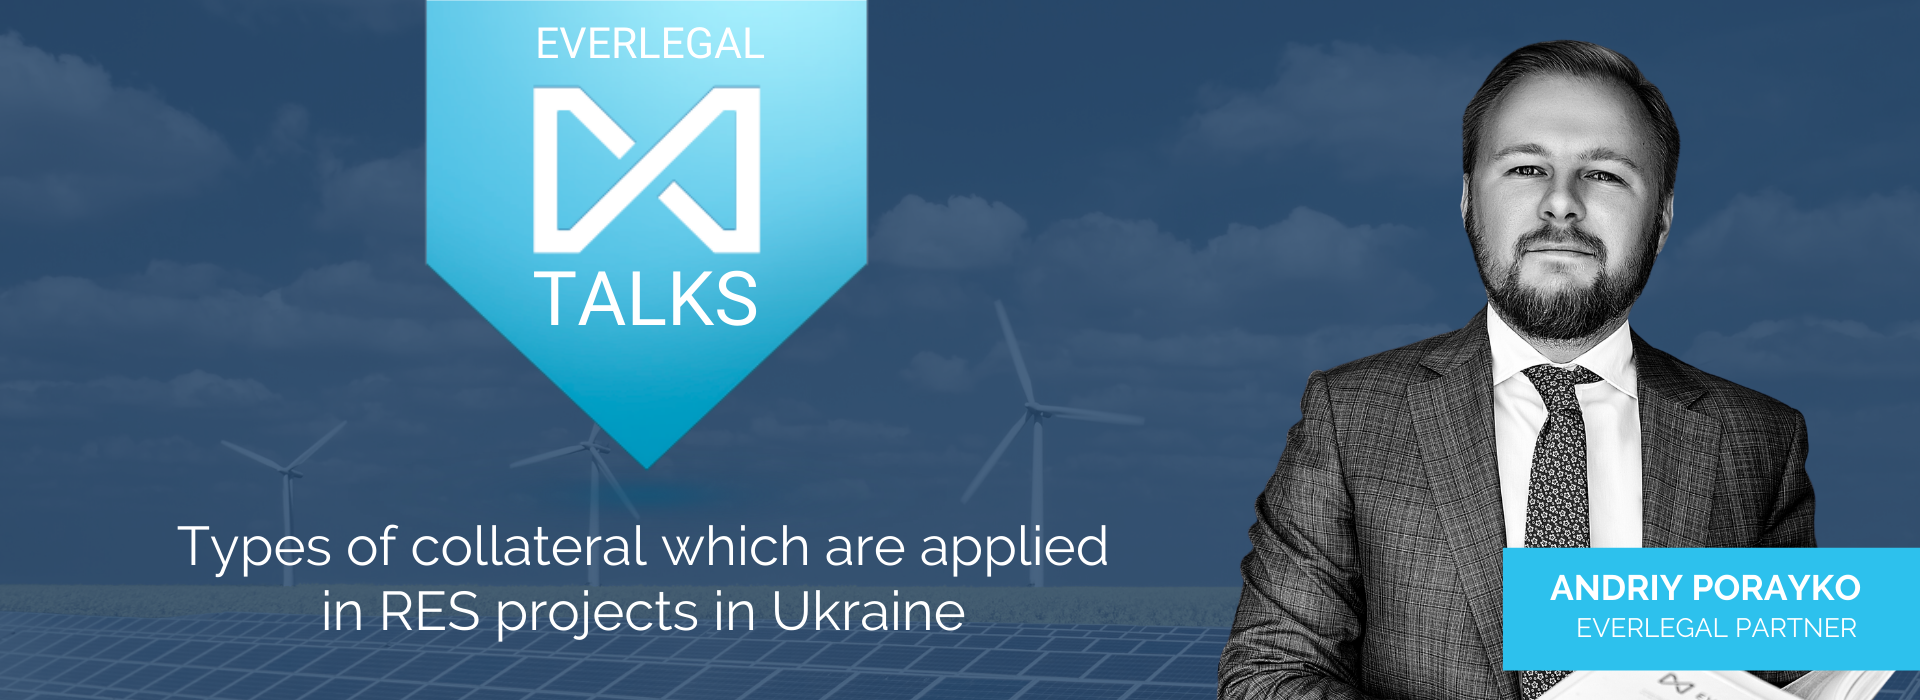 EverlegalTalks: Andriy Porayko on Types of Collateral Which Are Applied in RES Projects in Ukraine